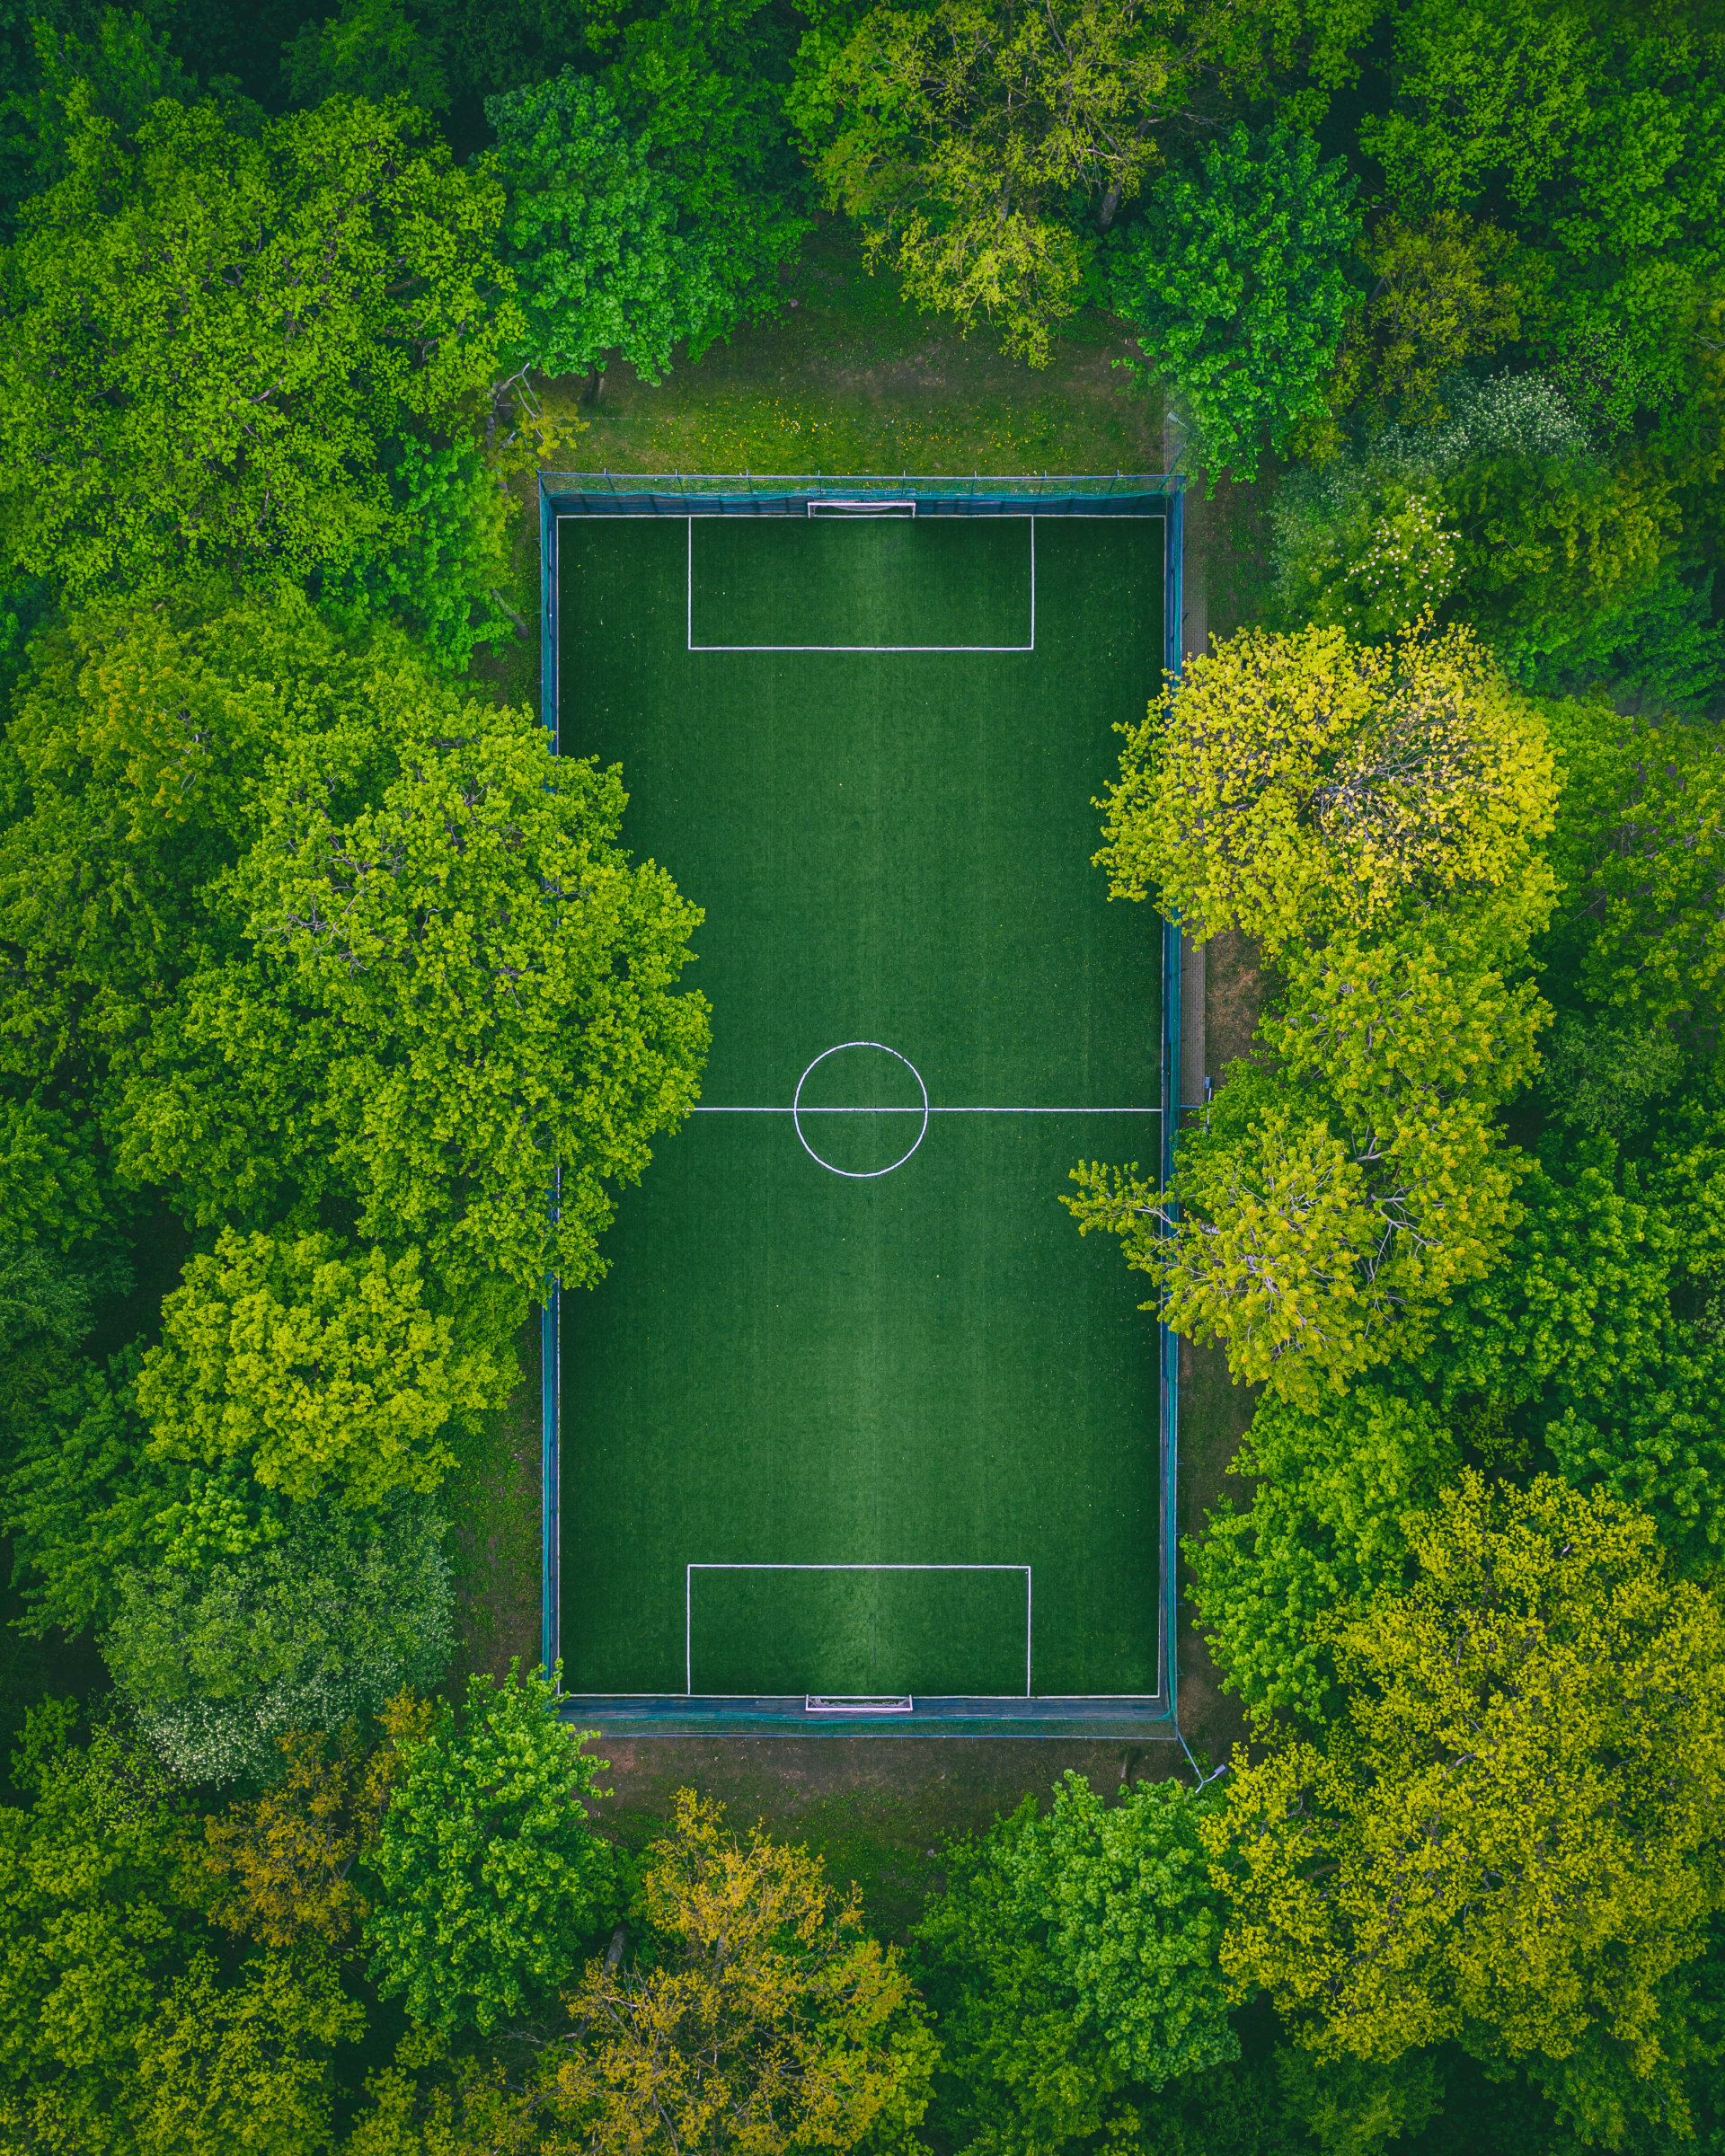 green, football field, sports, view from above, trees, playground, platform